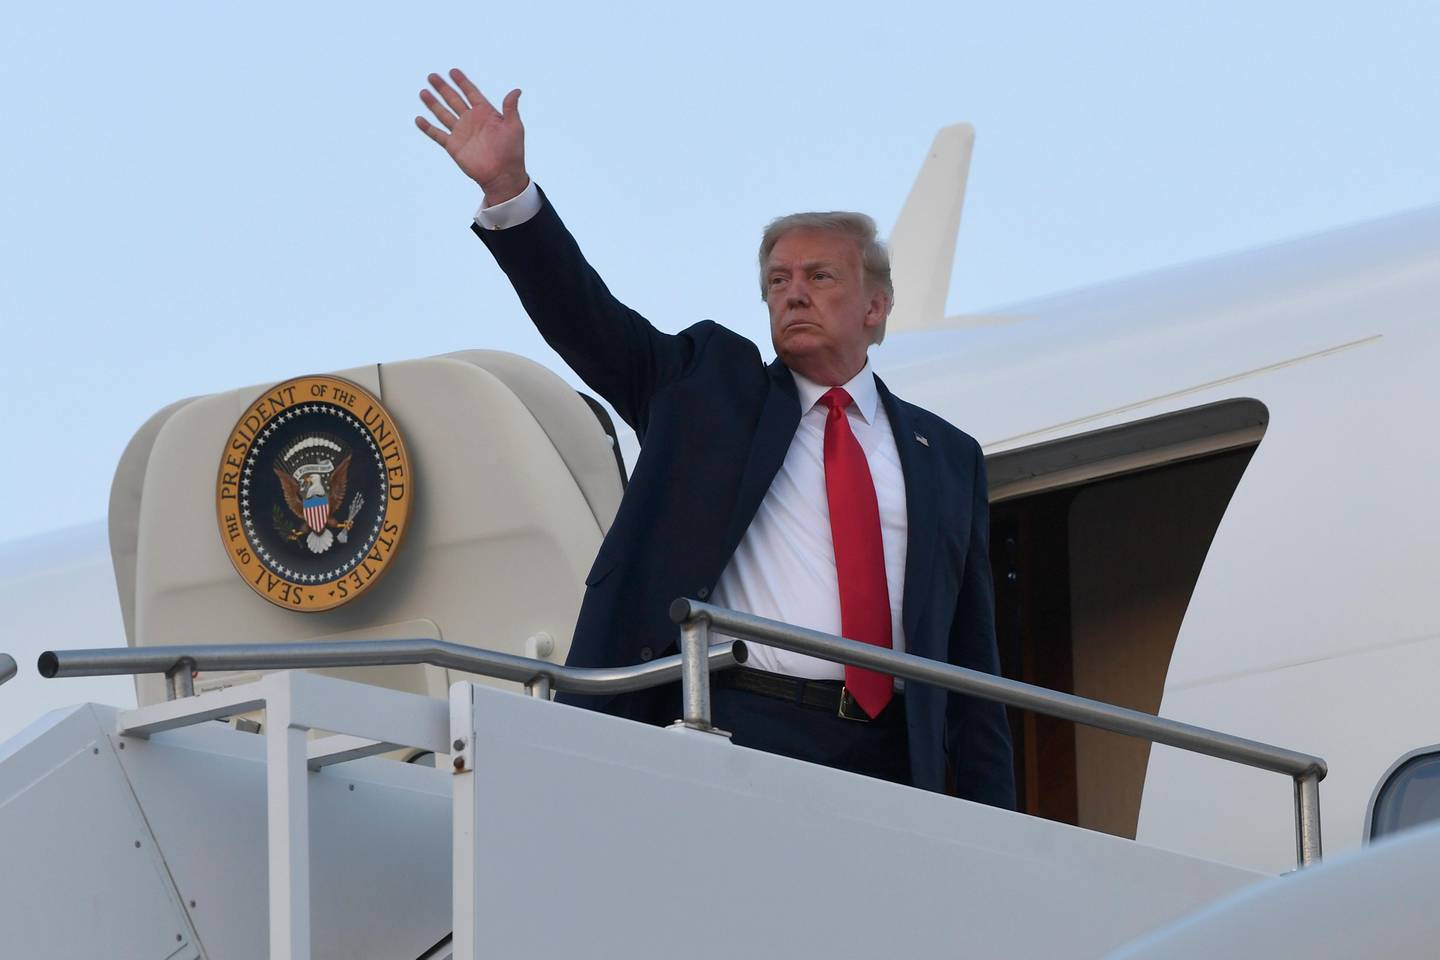 President Donald Trump waves from the top of the steps of Air Force One at Morristown Municipal Airport in Morristown, N.J., Sunday, Aug. 9, 2020. Trump is returning to Washington after spending the weekend at the Trump National Golf Club. (AP Photo/Susan Walsh)